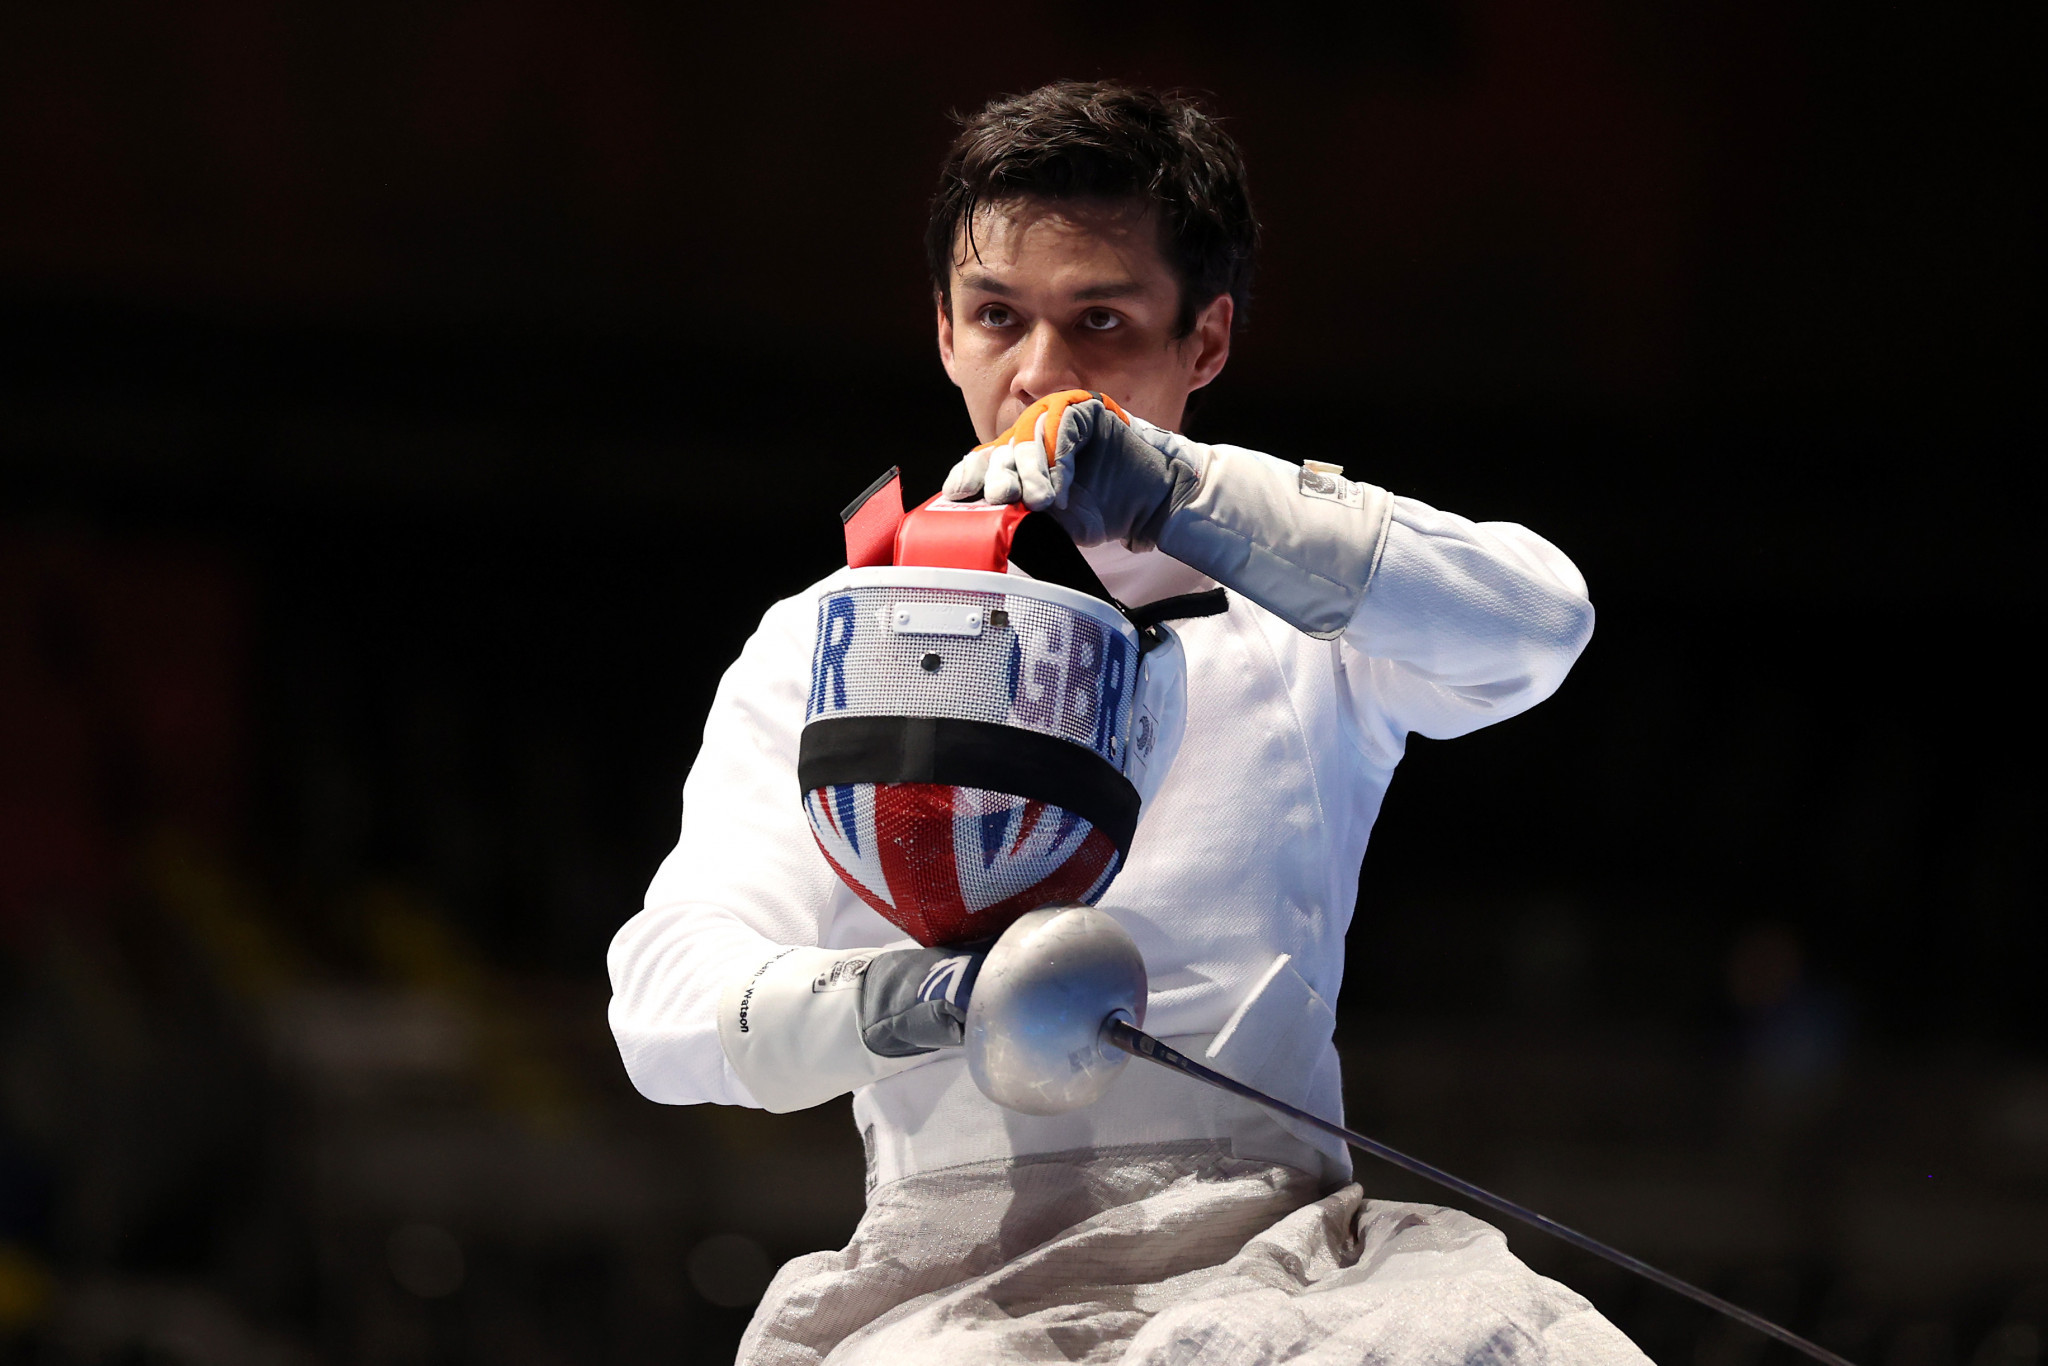 Oliver Lam-Watson won gold with the Piers Gilliver and Dimitri Coutya in the men's team sabre ©Getty Images